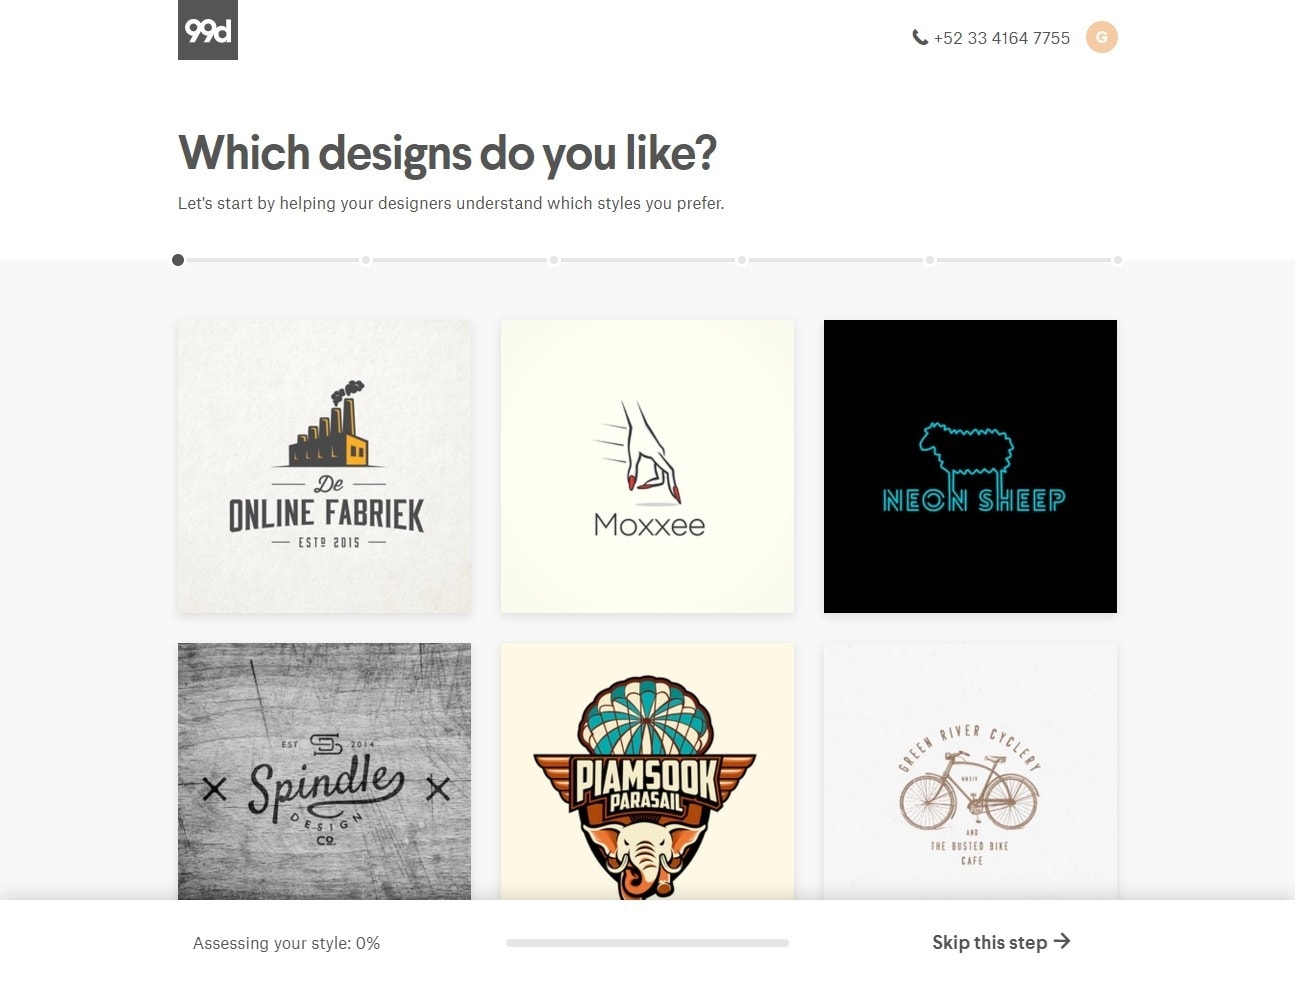 Screenshot of the 99designs design process asking 'Which designs do you like?'